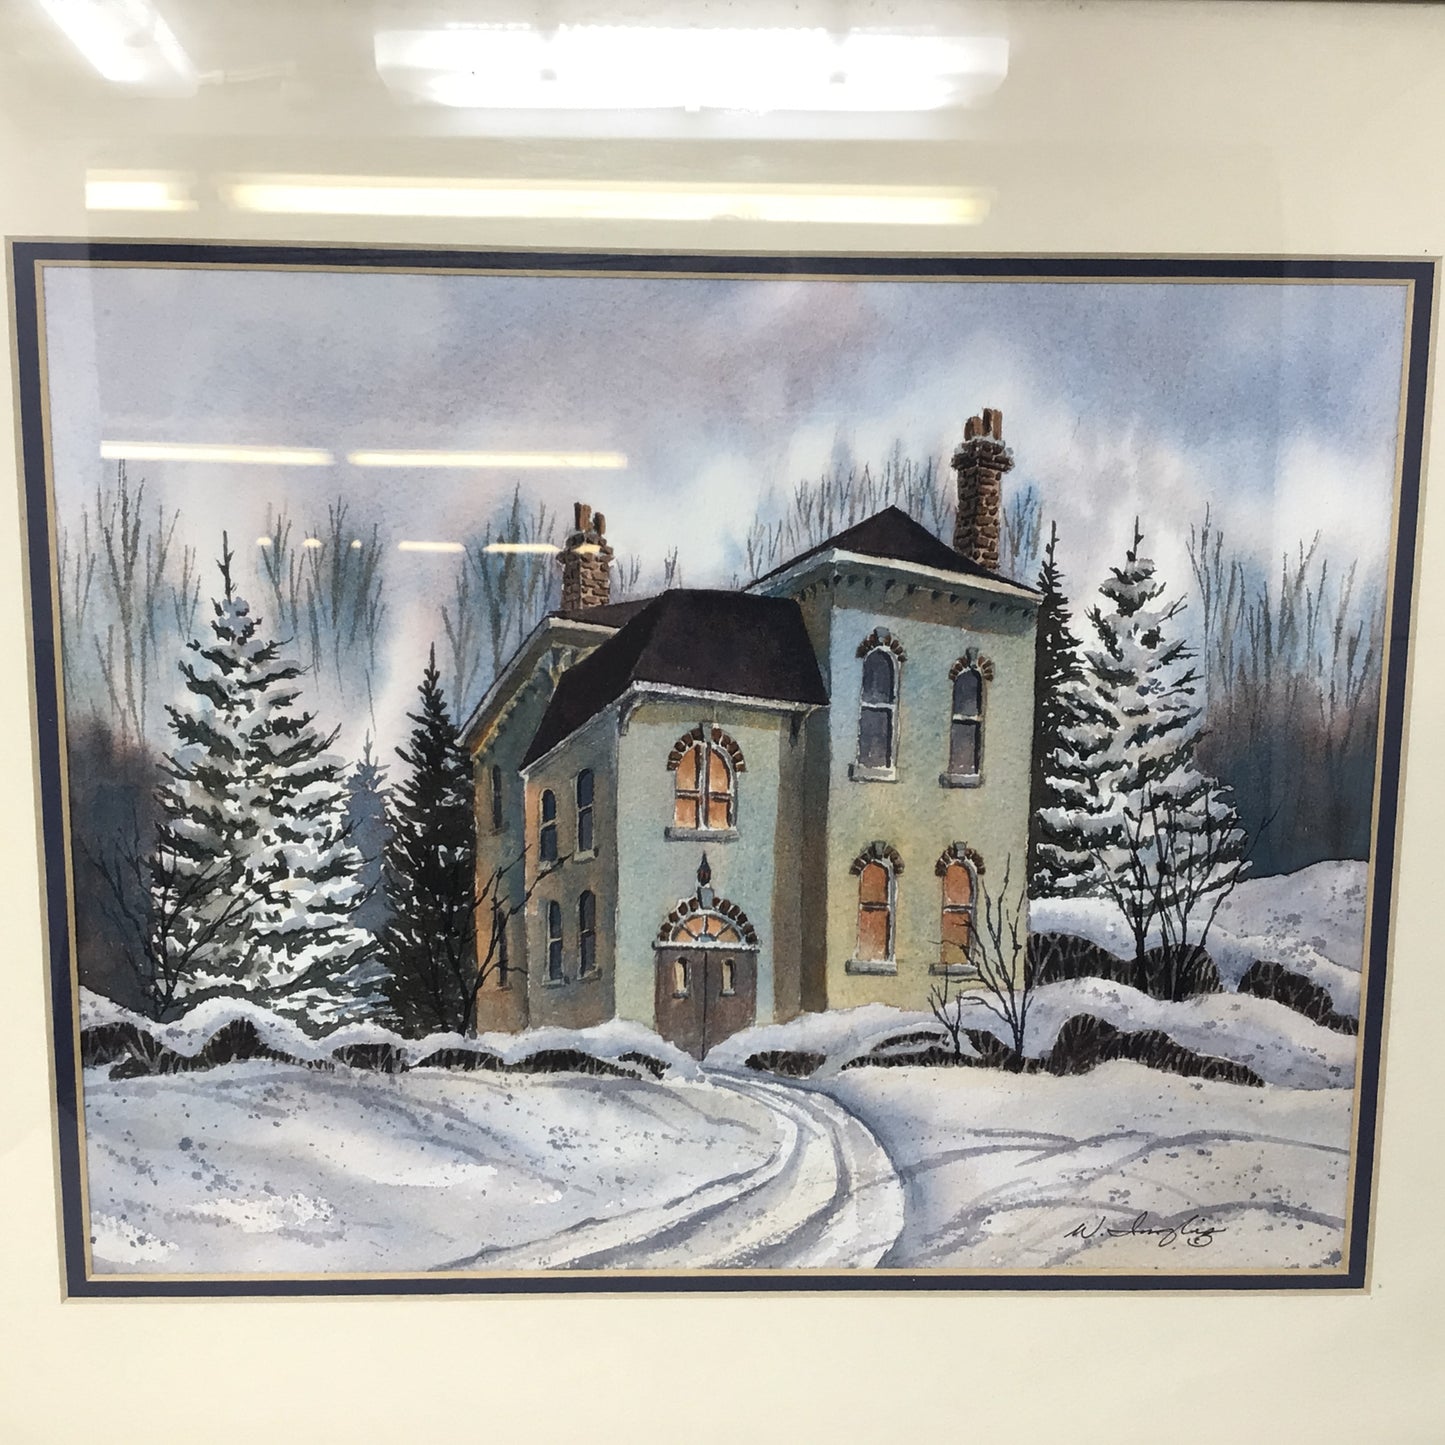 “Winter Light” Watercolour Painting By Bill Inglis In Frame